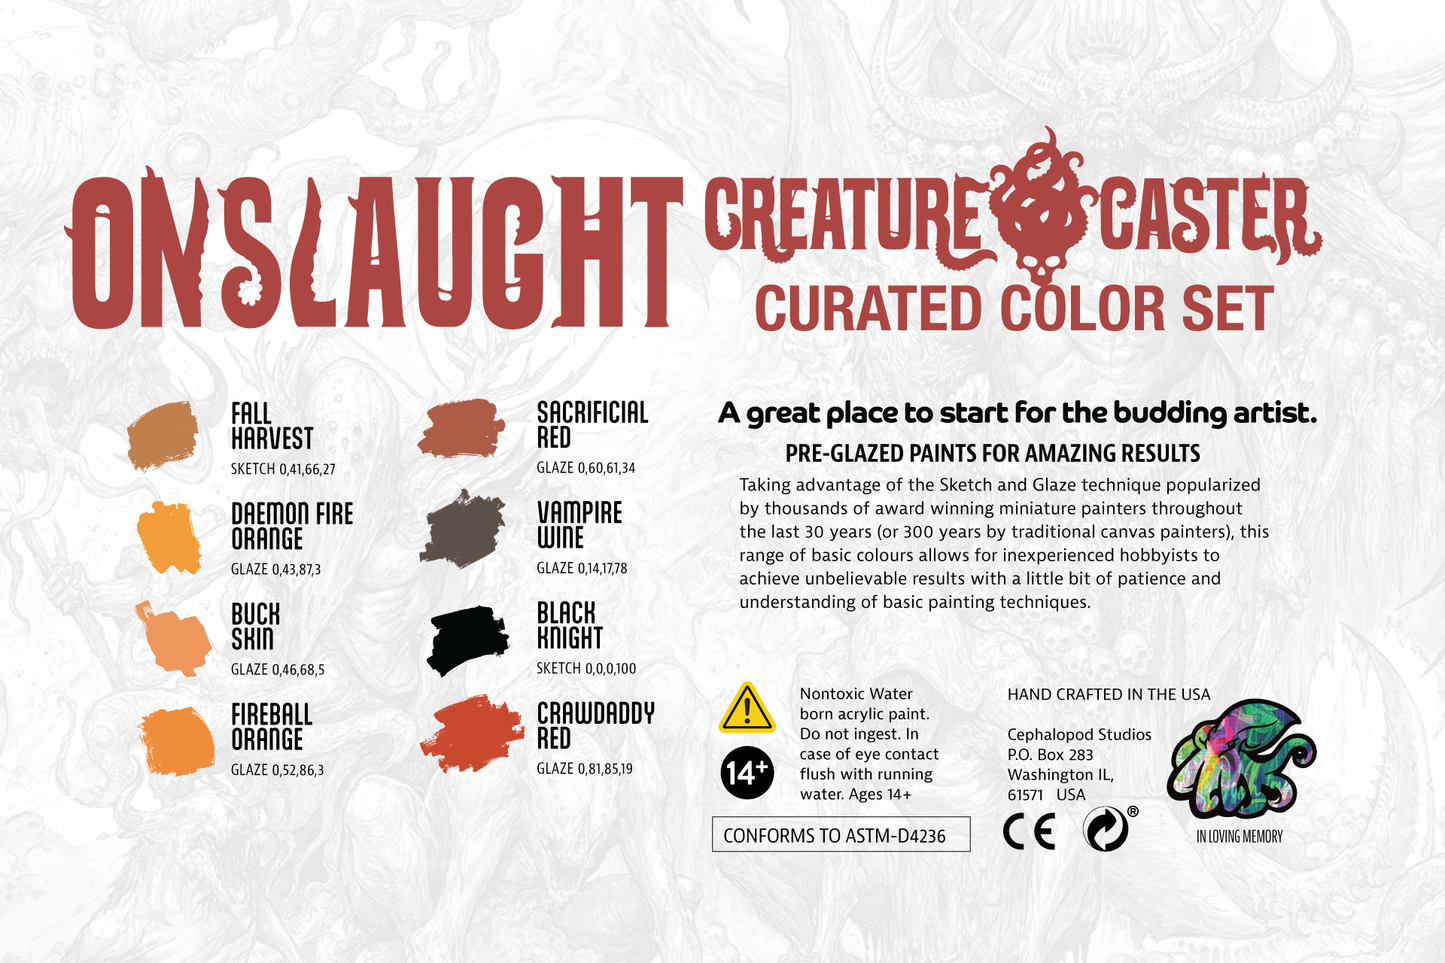 Onslaught - Curated Color Set